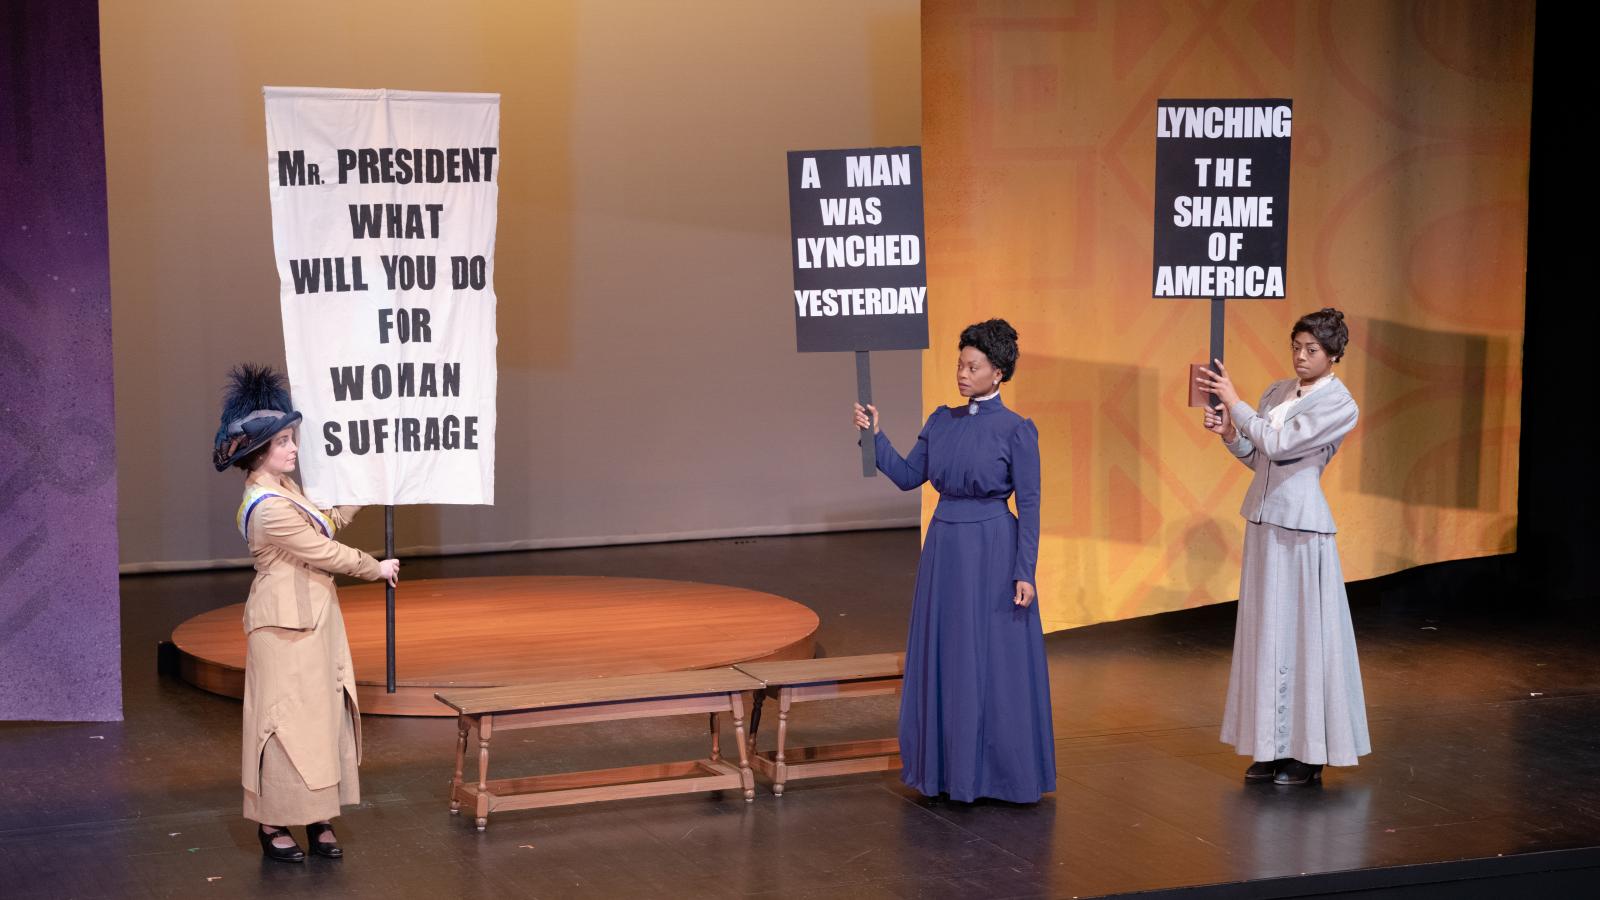 Actresses hold up picket signs about suffrage and lynching